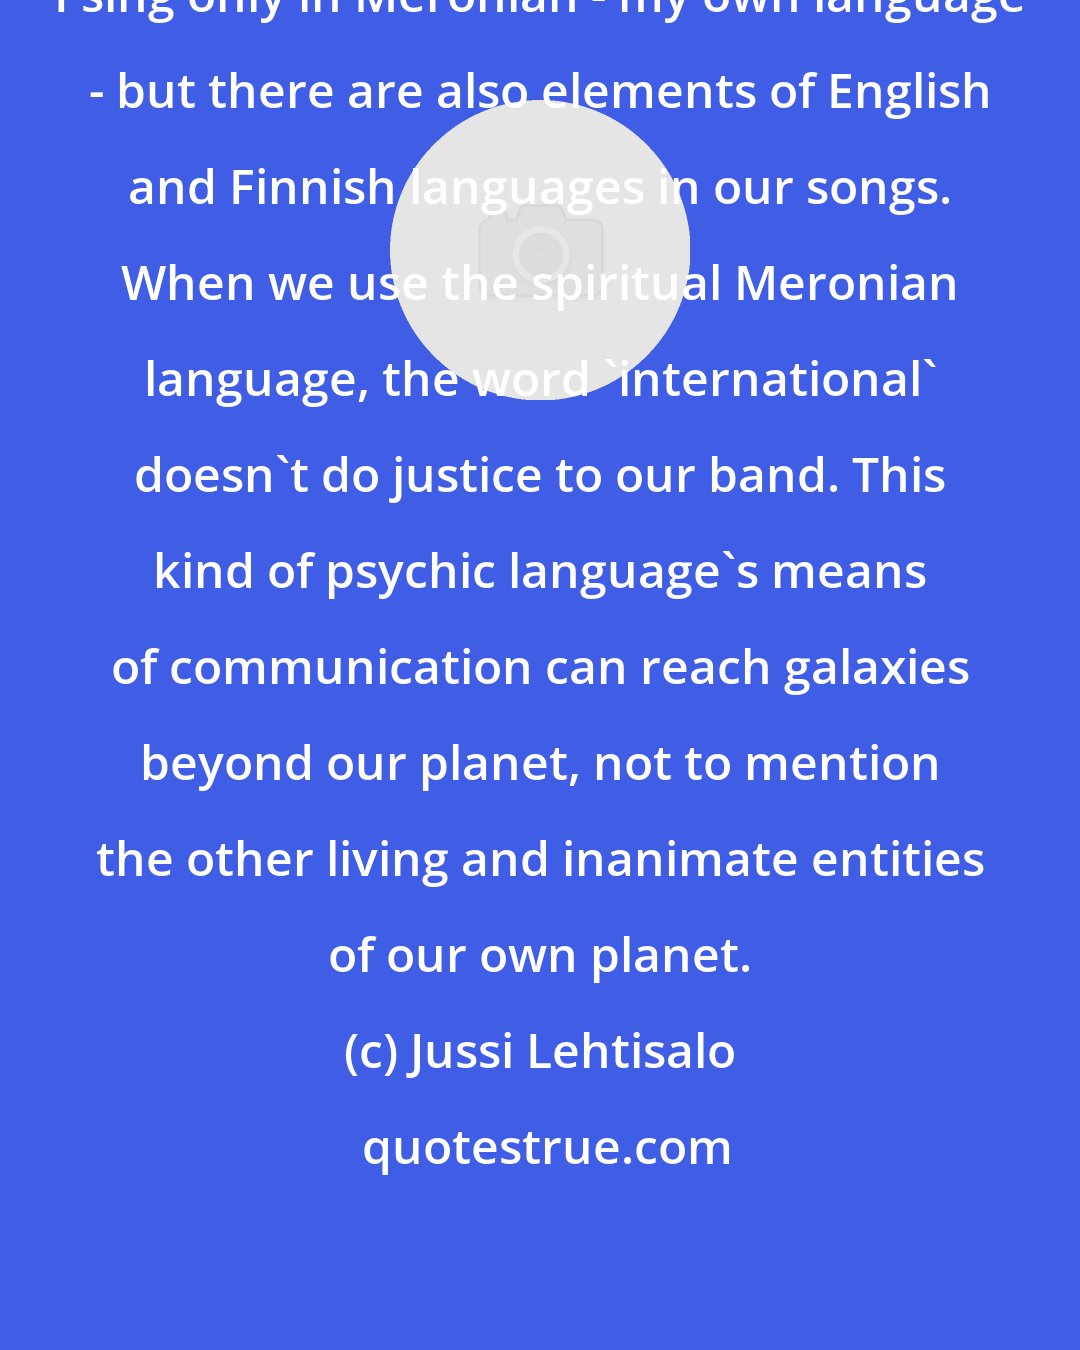 Jussi Lehtisalo: I sing only in Meronian - my own language - but there are also elements of English and Finnish languages in our songs. When we use the spiritual Meronian language, the word 'international' doesn't do justice to our band. This kind of psychic language's means of communication can reach galaxies beyond our planet, not to mention the other living and inanimate entities of our own planet.